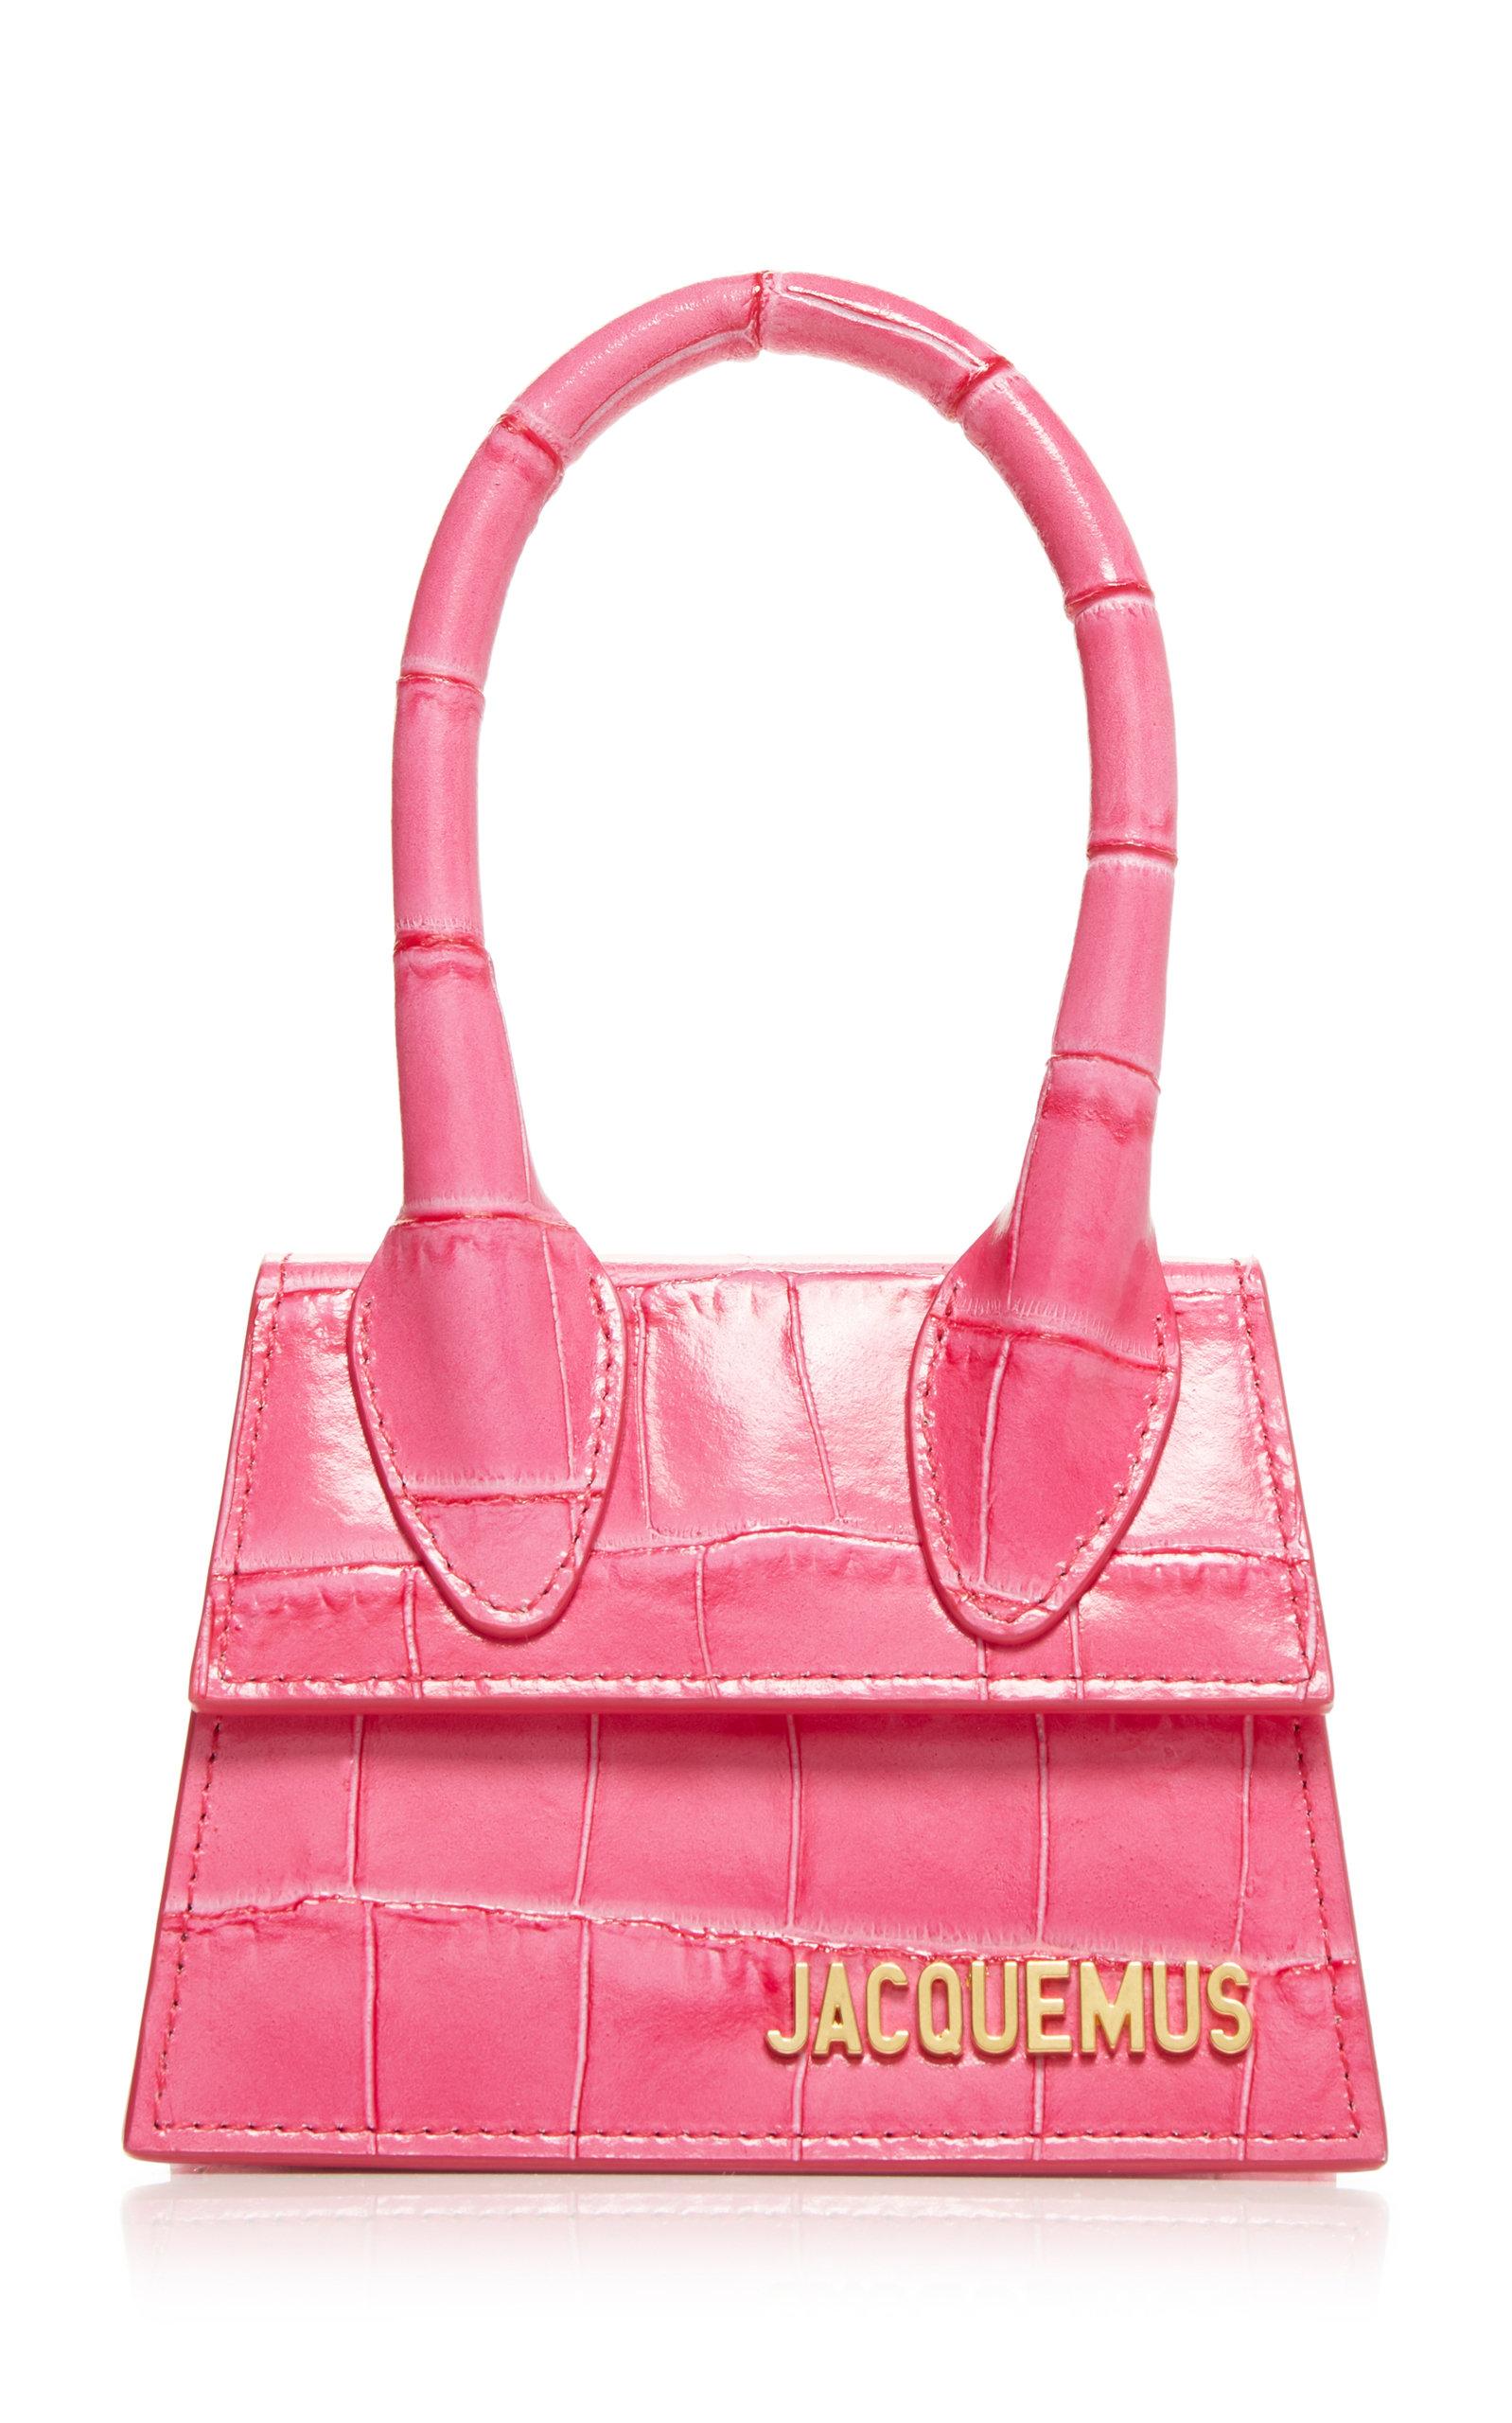 Jacquemus Le Chiquito Leather Mini Bag in Pink | Lyst